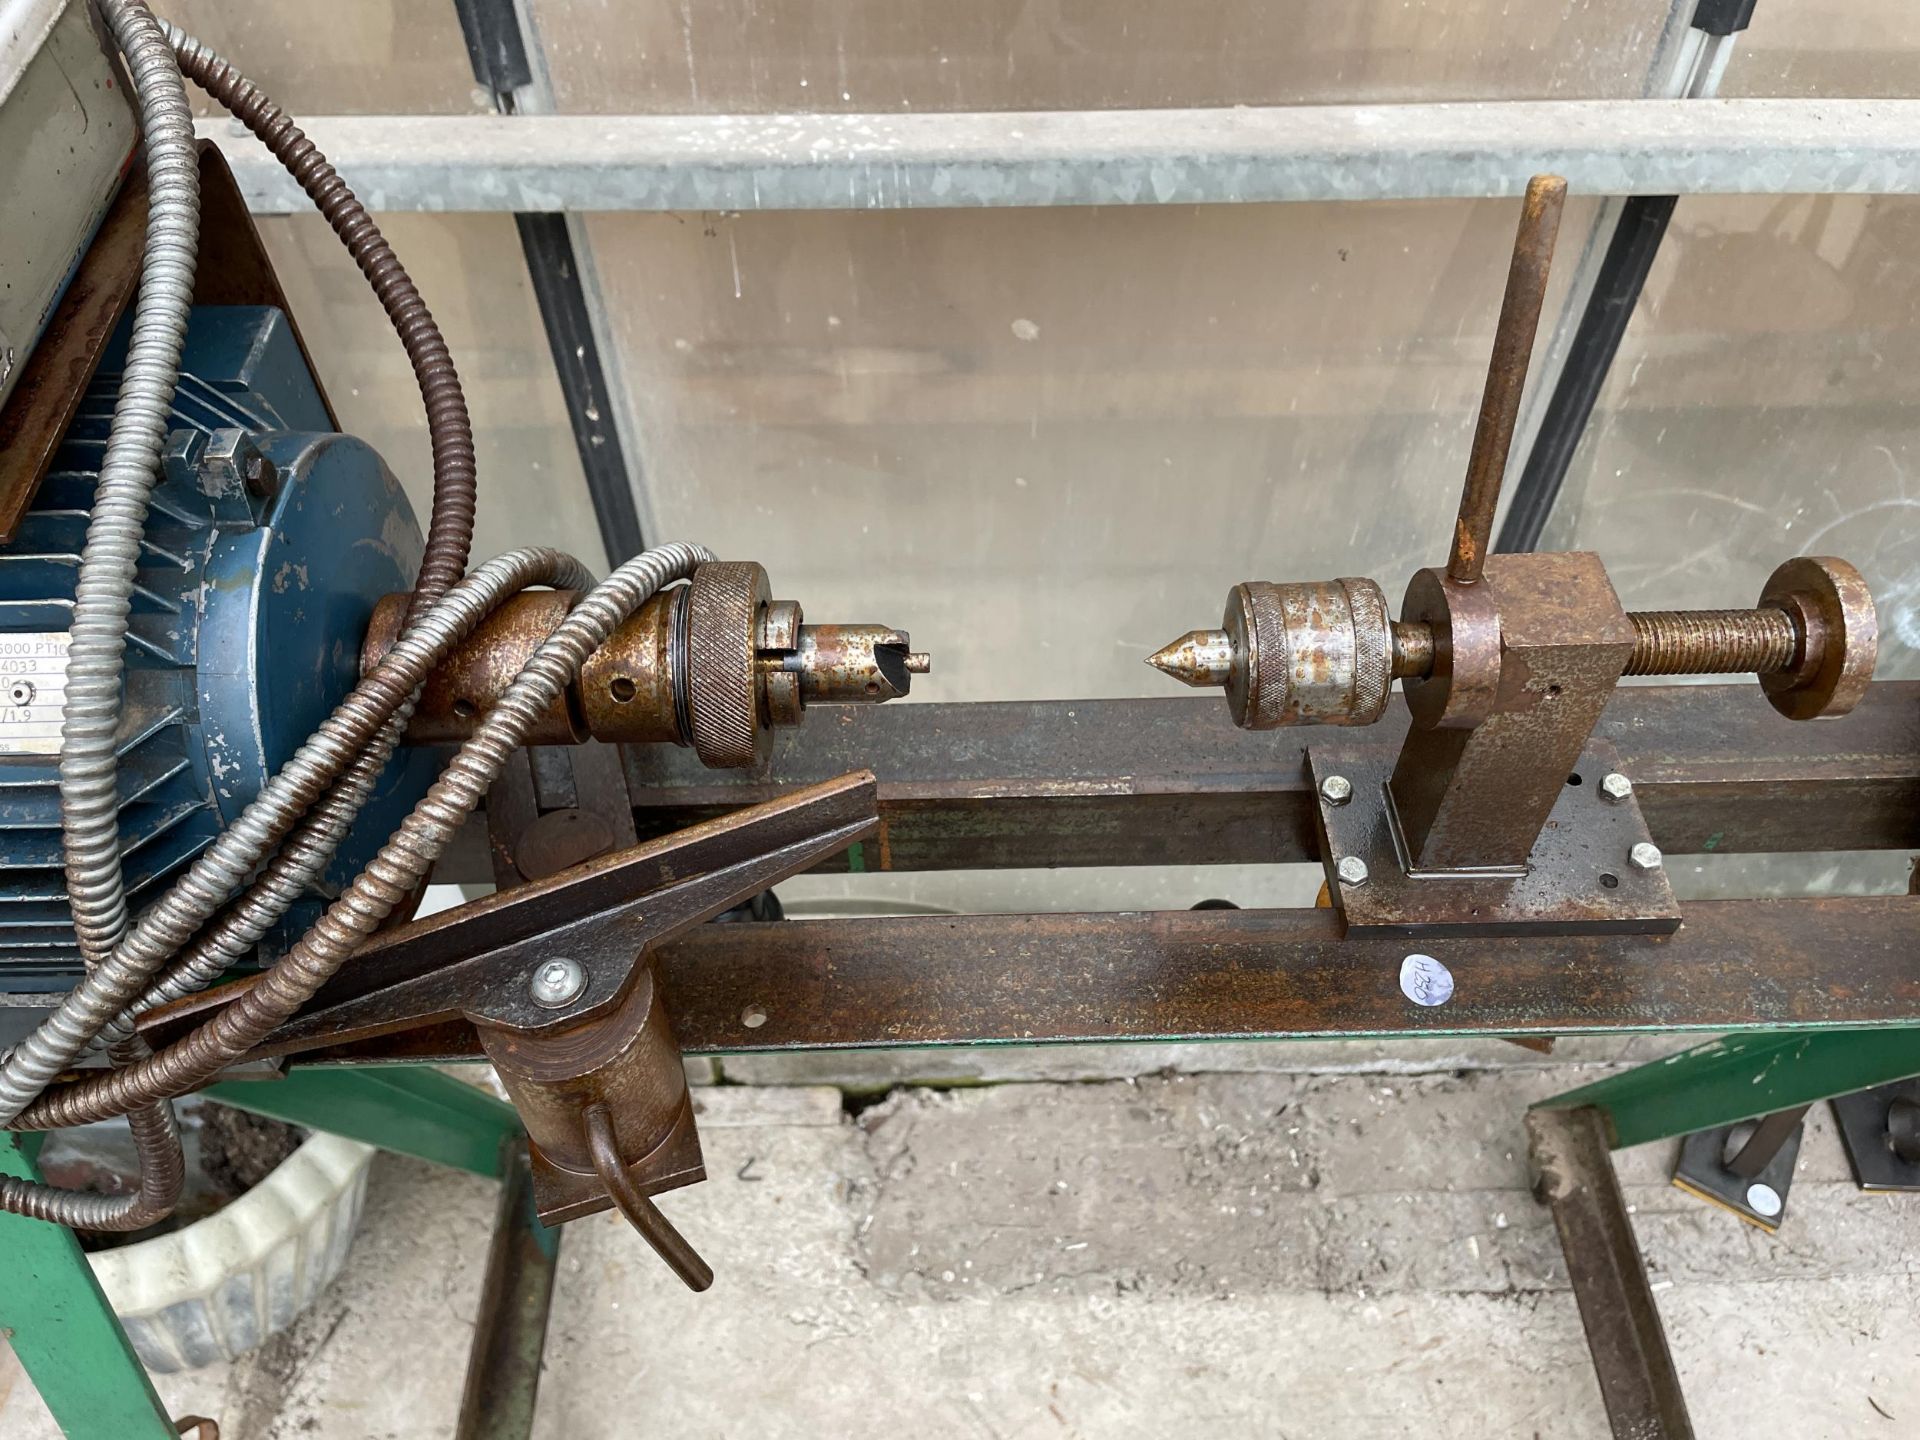 A METAL TURNING LATHE ON A STAND WITH A HILKA BENCH VICE - Image 4 of 6